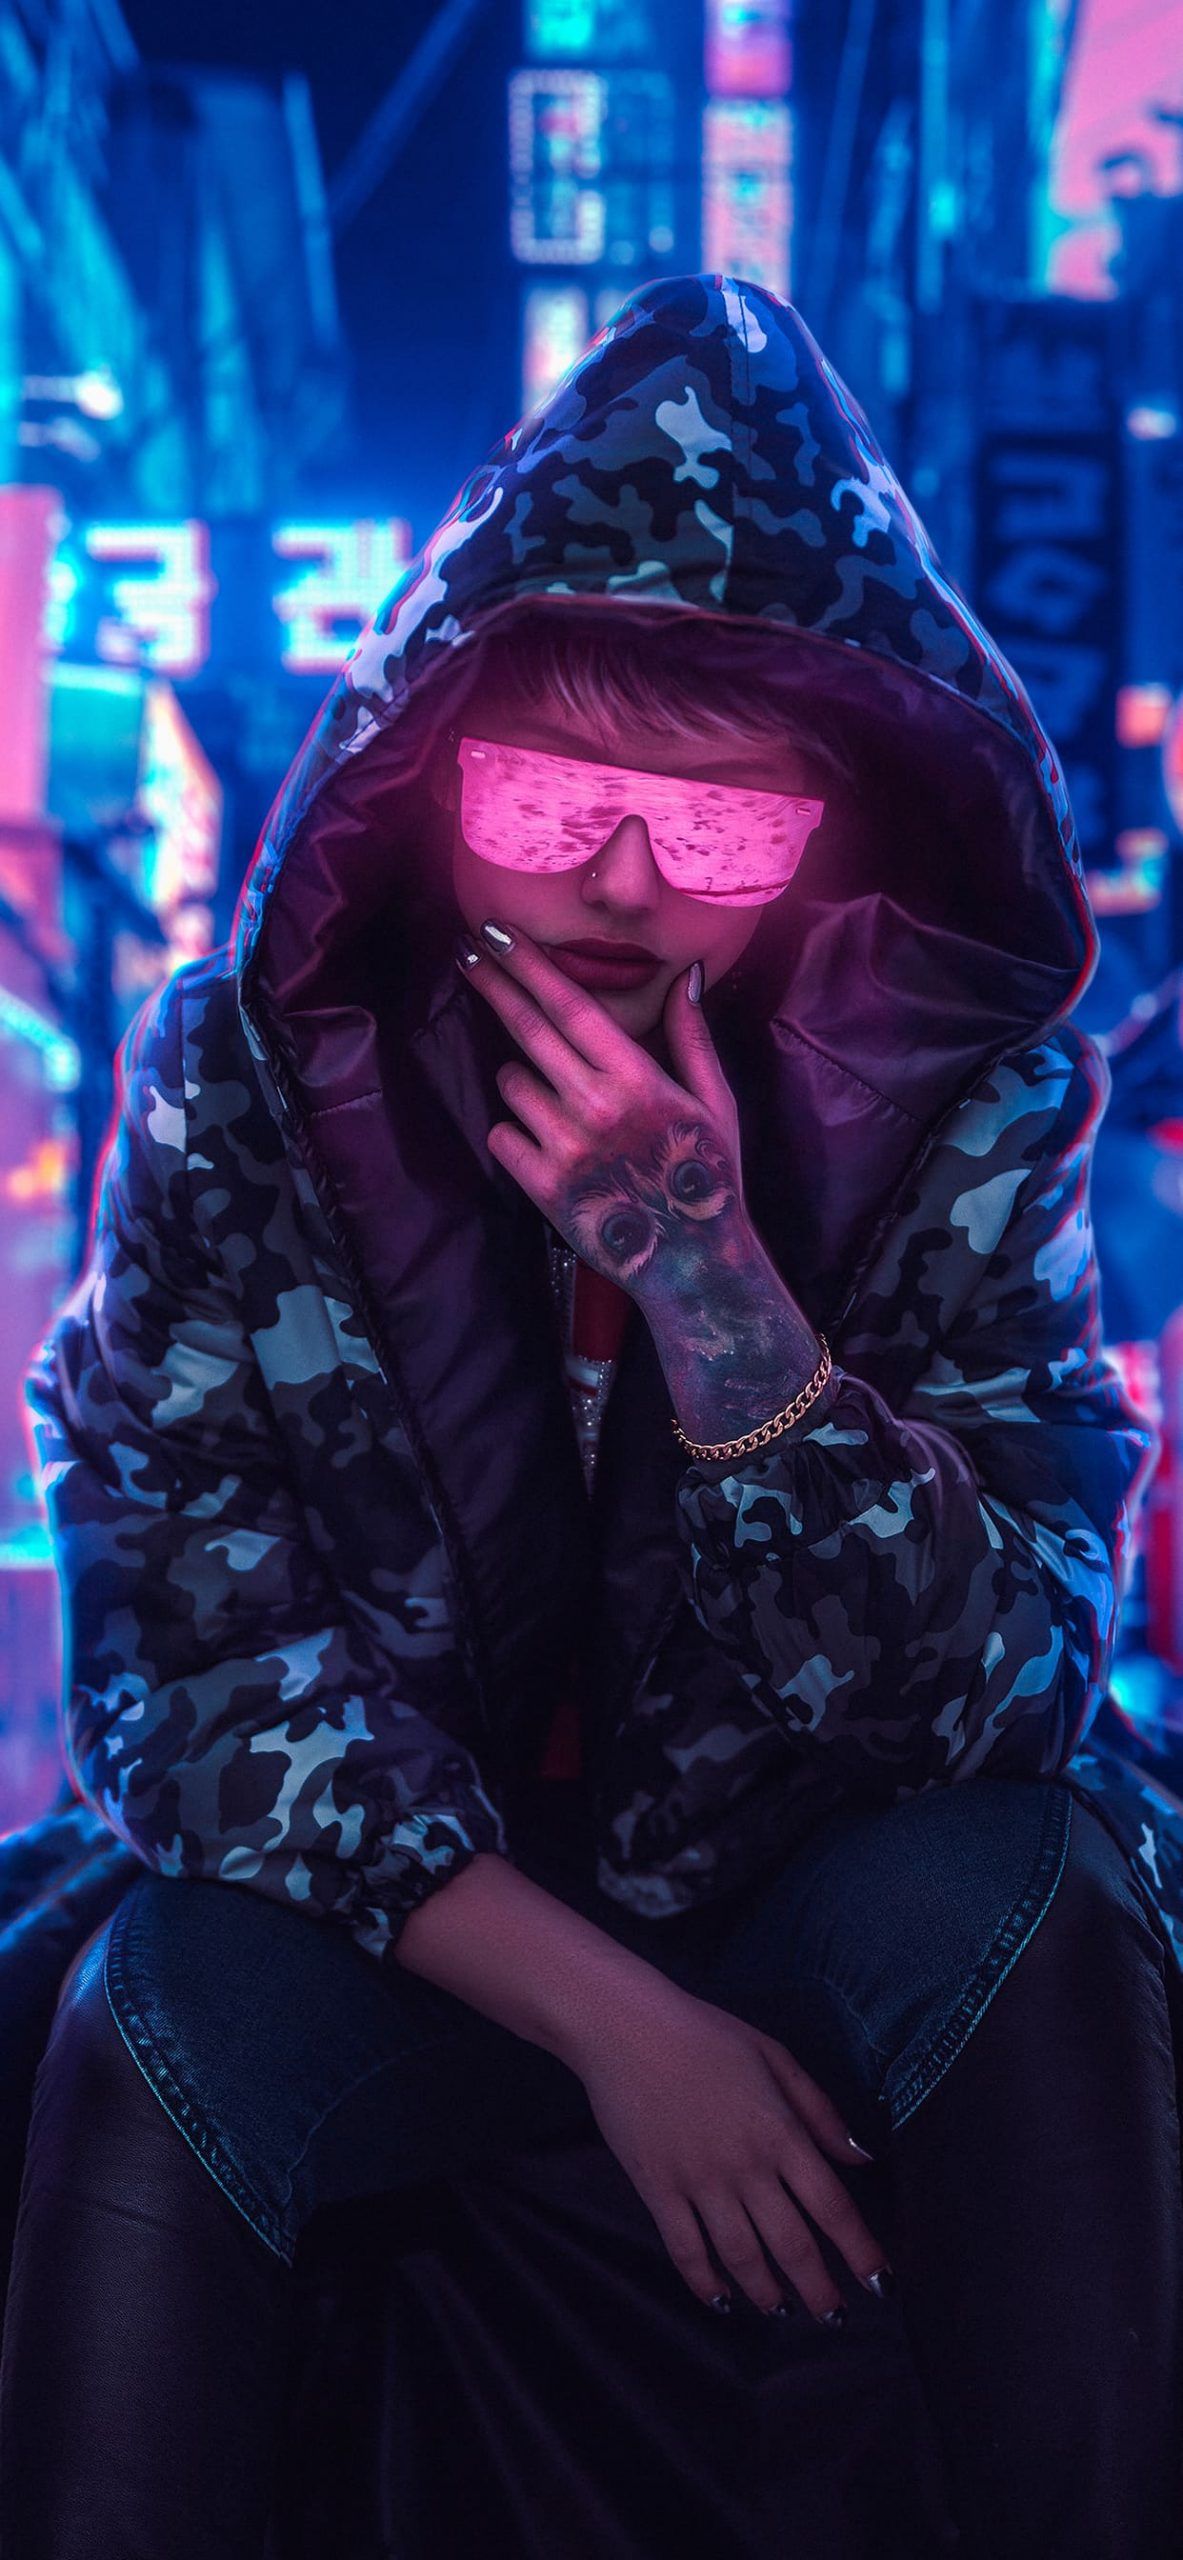 A woman with pink glasses and a camo jacket in a city at night - HD